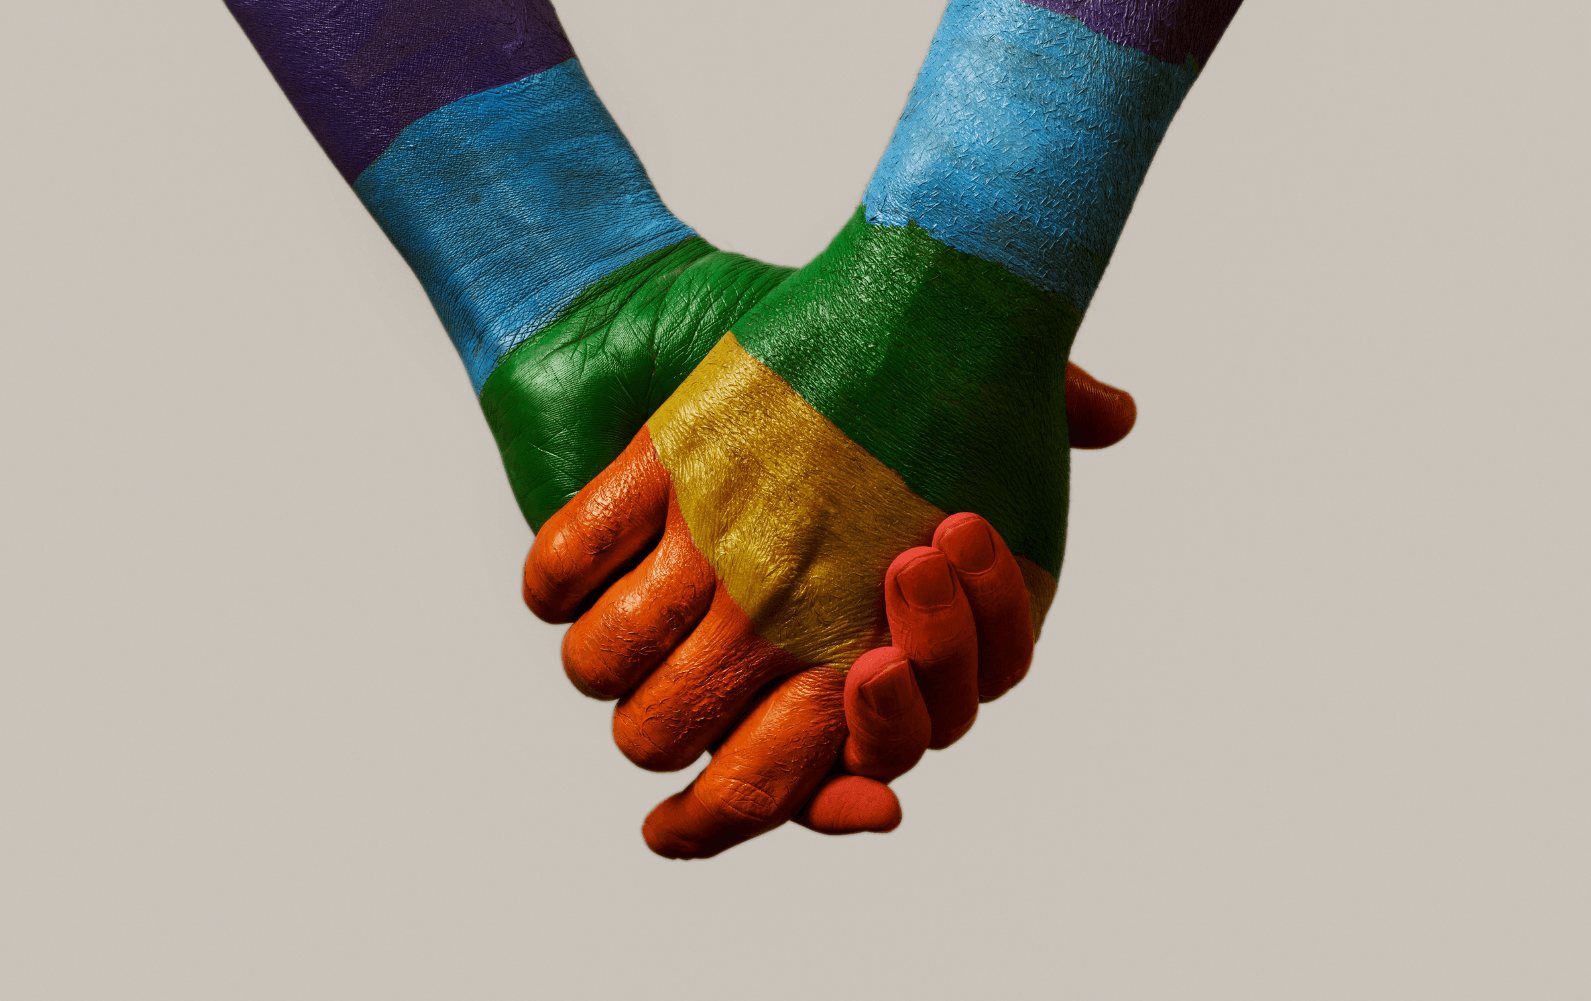 Episode 41 – The Search for Acceptance: LGBTQ Jews and Mental Health